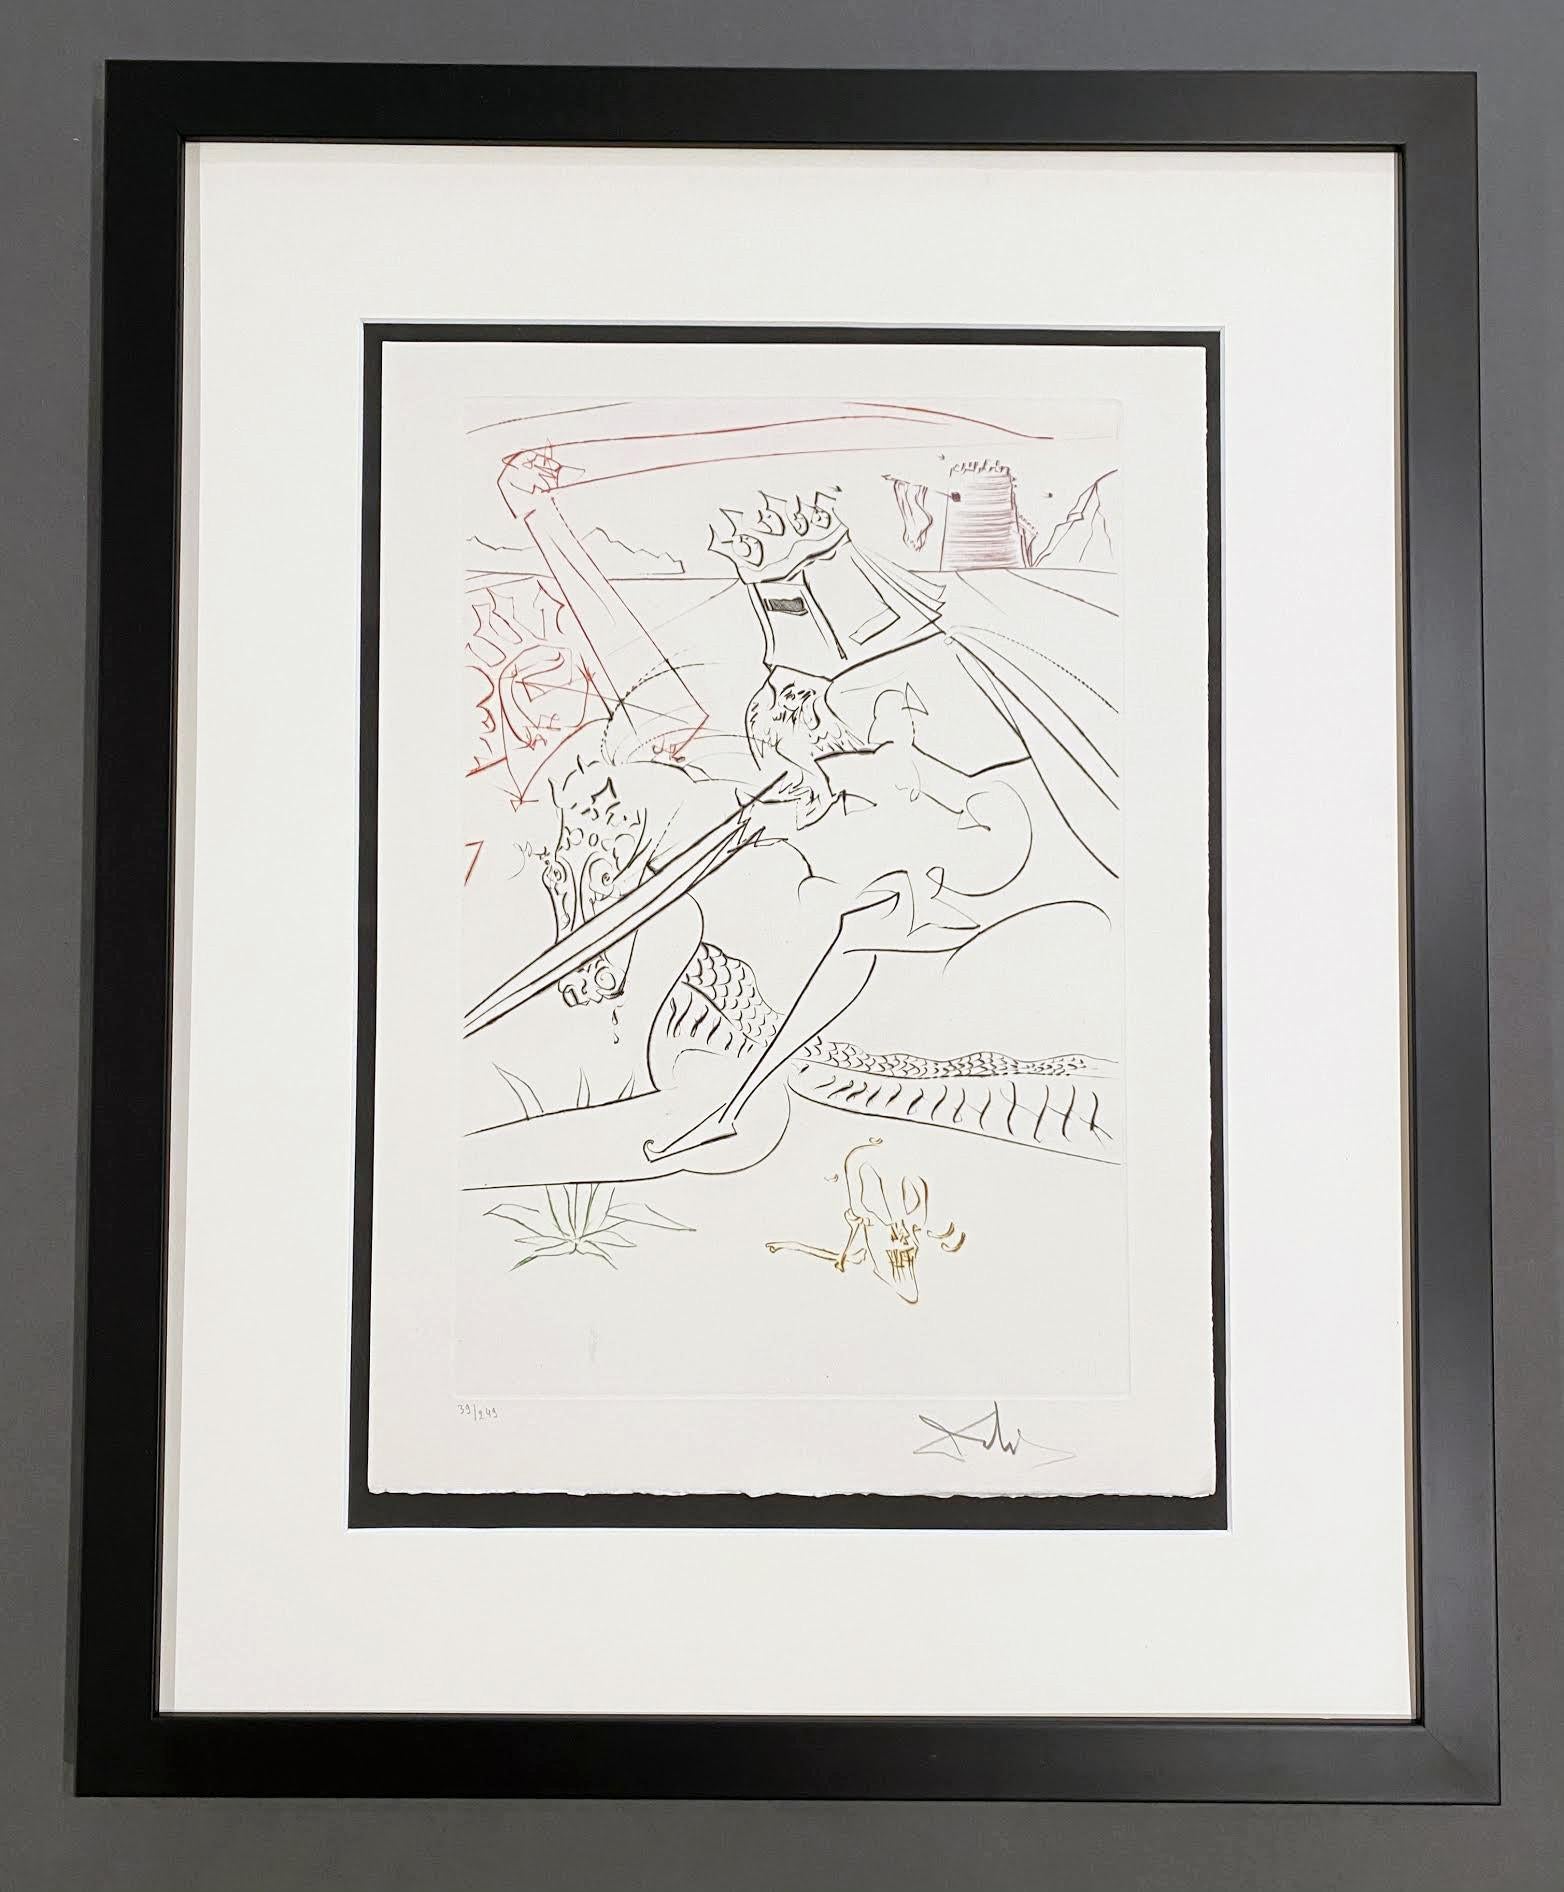 Salvador Dalí Landscape Print - The Black Knight, from The Quest for the Grail 